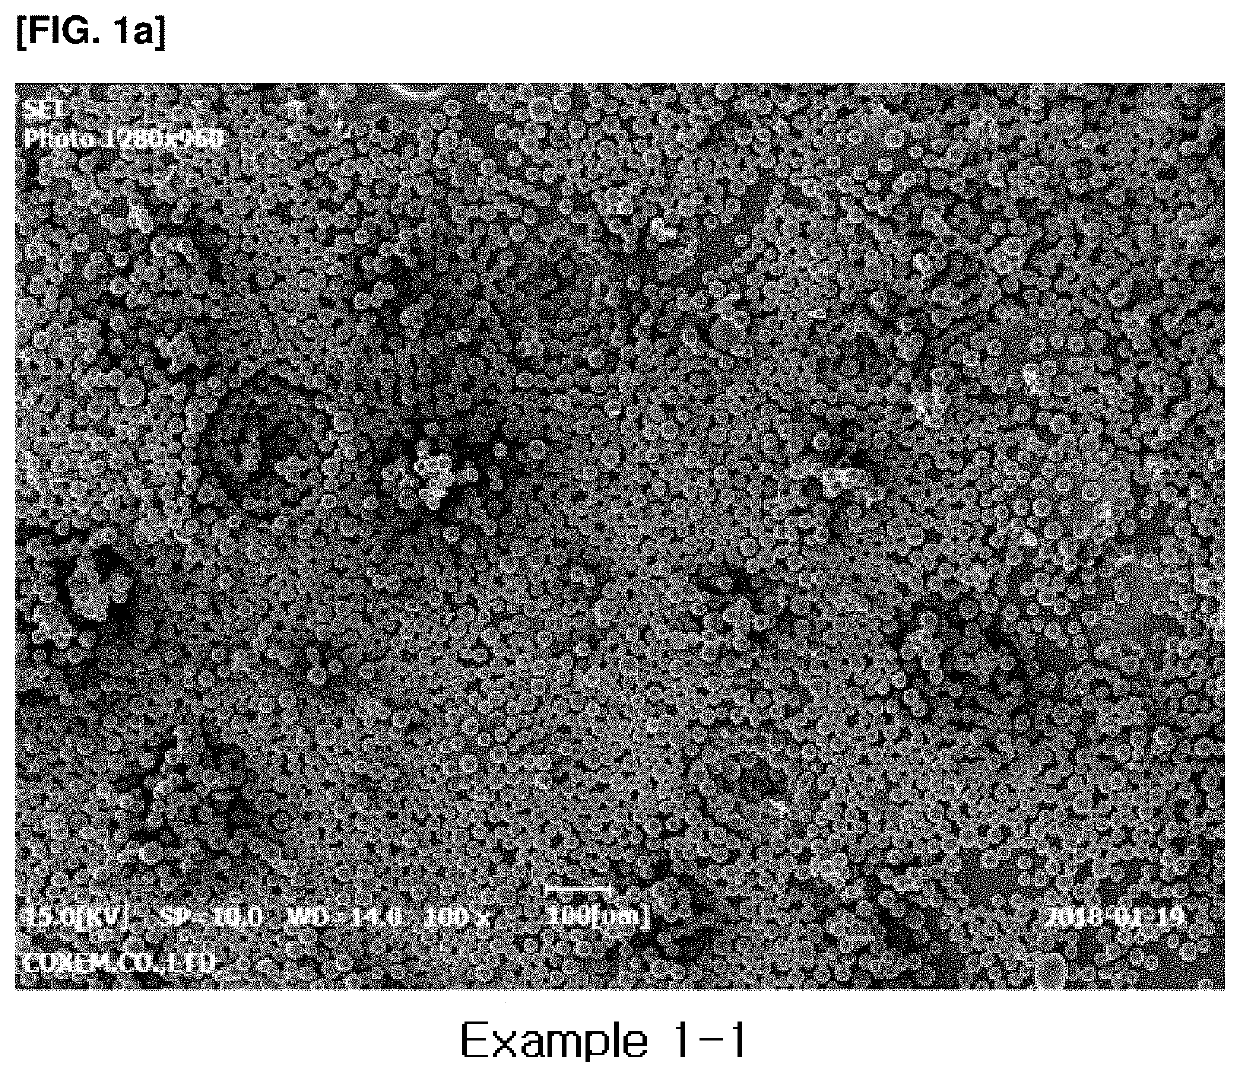 Collagen peptide-containing polycaprolactone microsphere filler and preparation method therefor